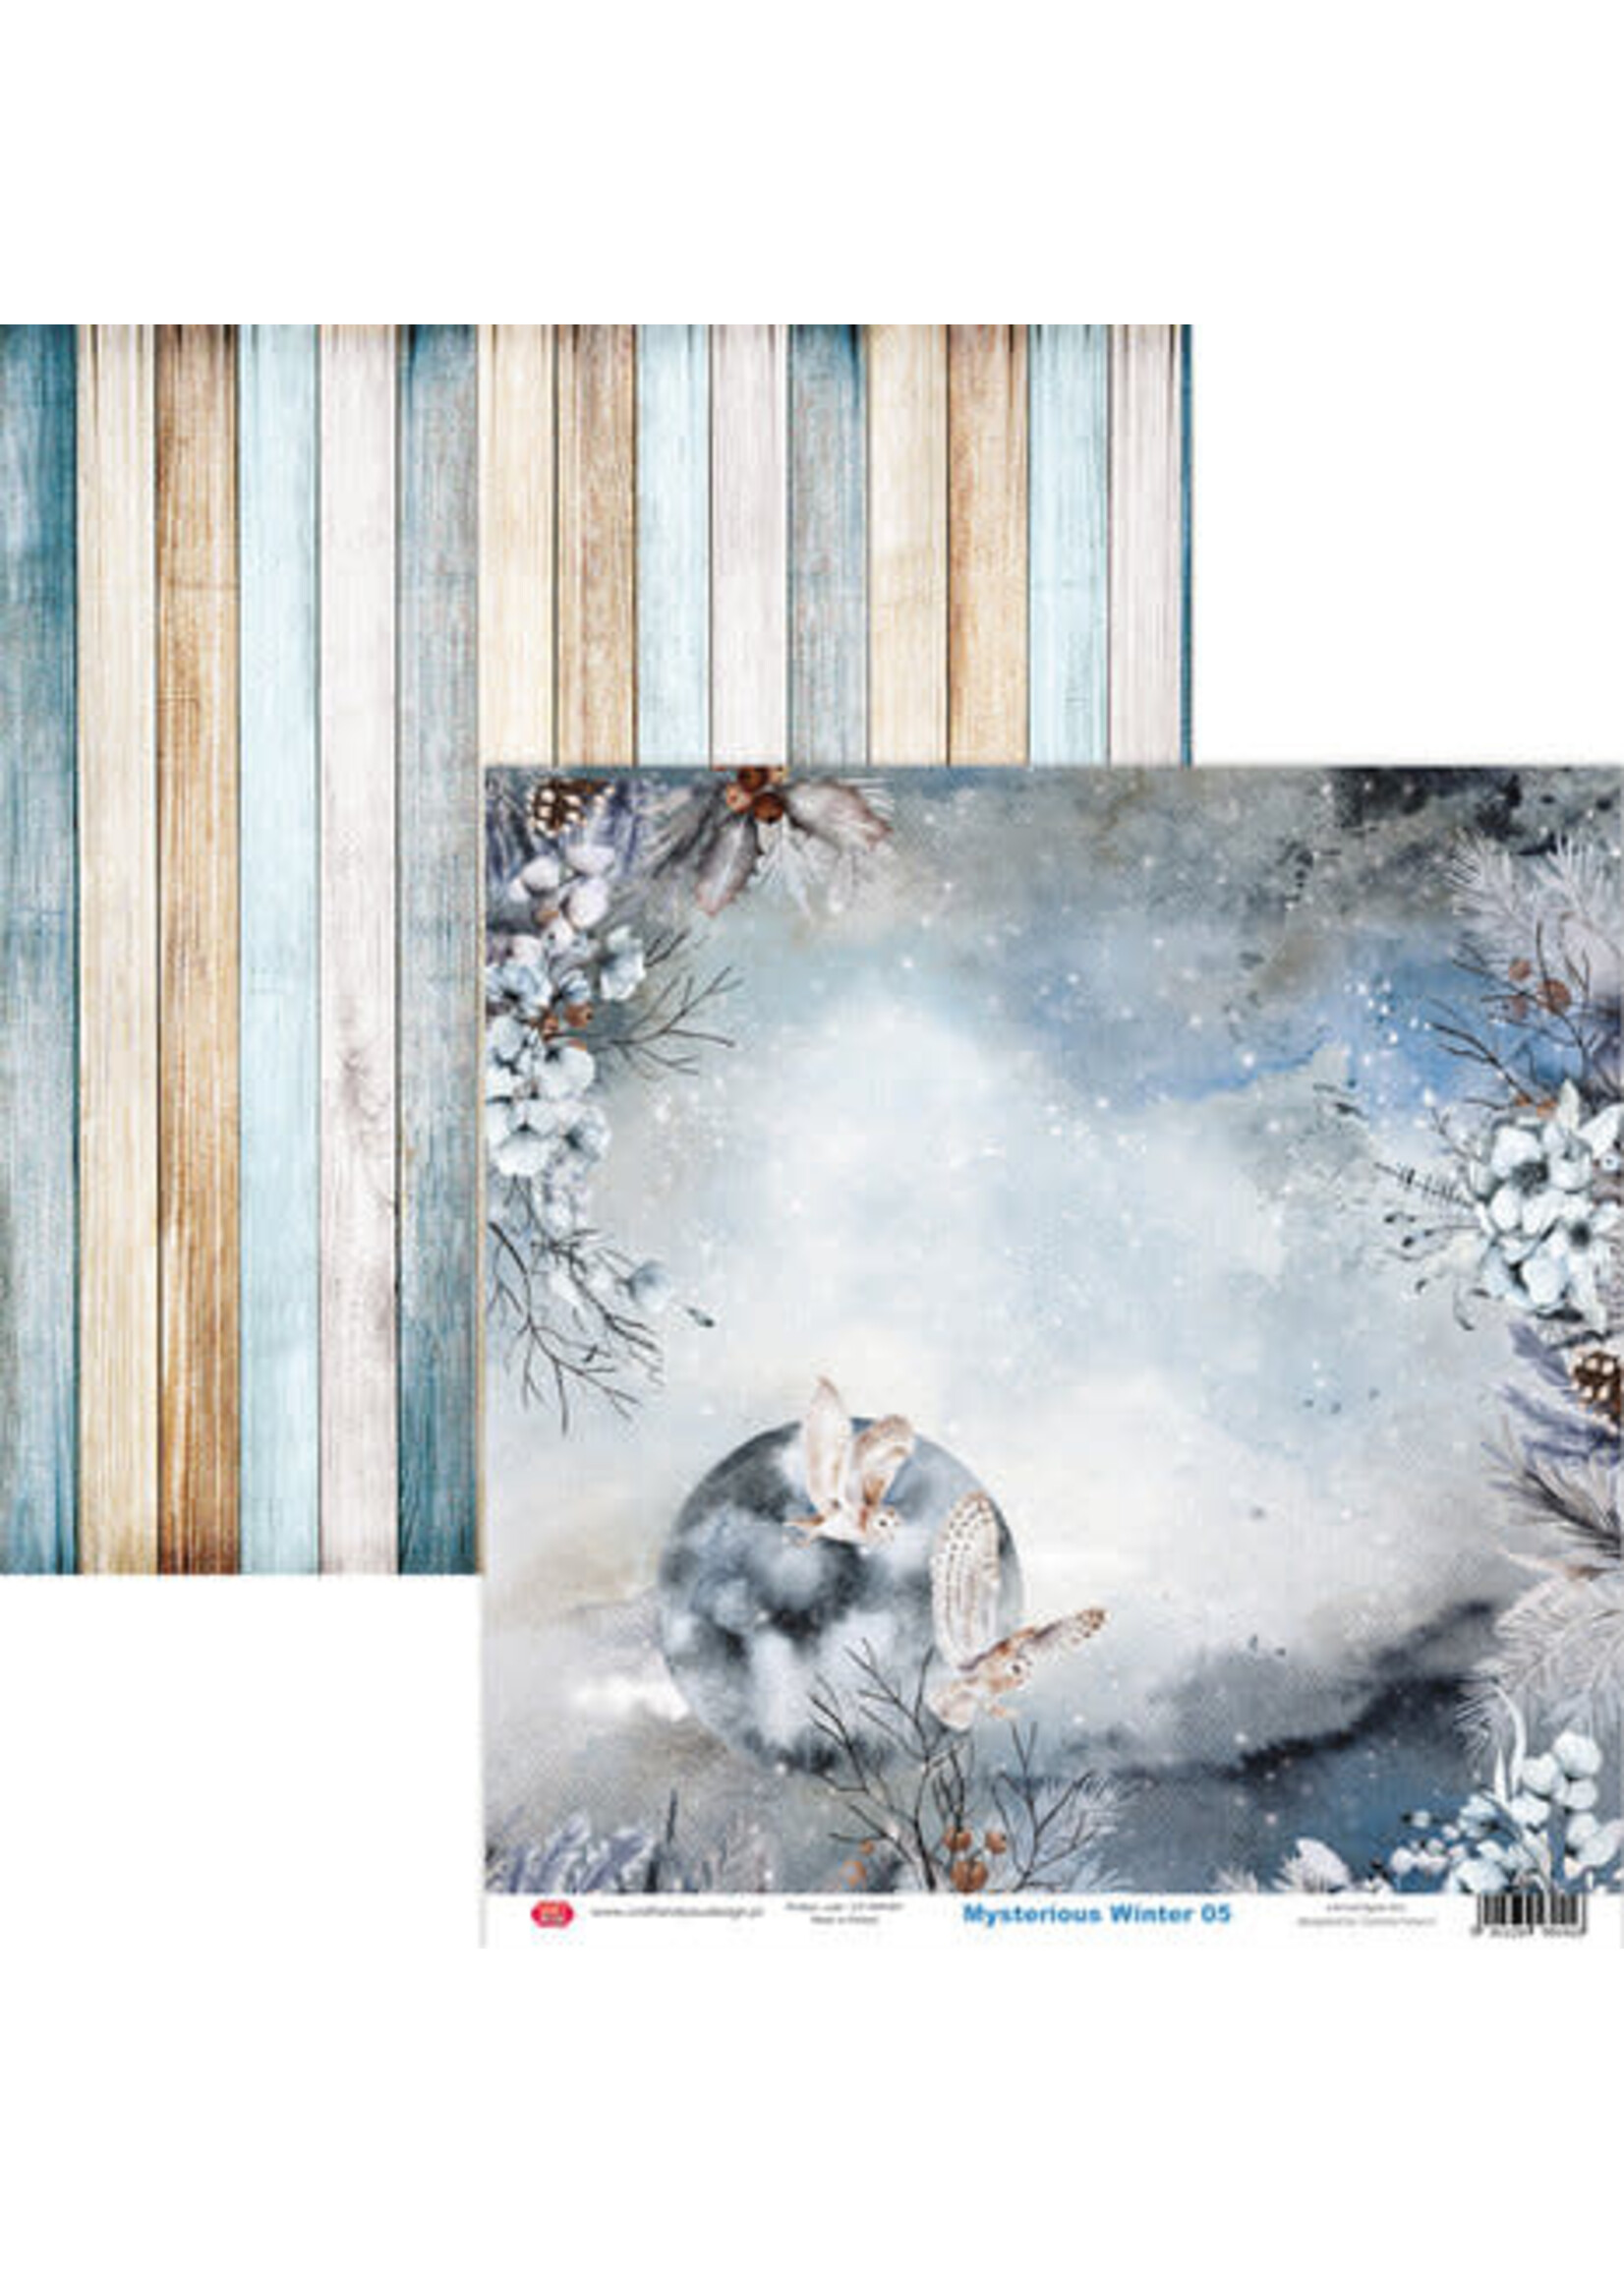 Craft and You Mysterious Winter 12x12 Inch Paper Set 250gsm (12sheets) (CYD-CPS-MWI30-12)